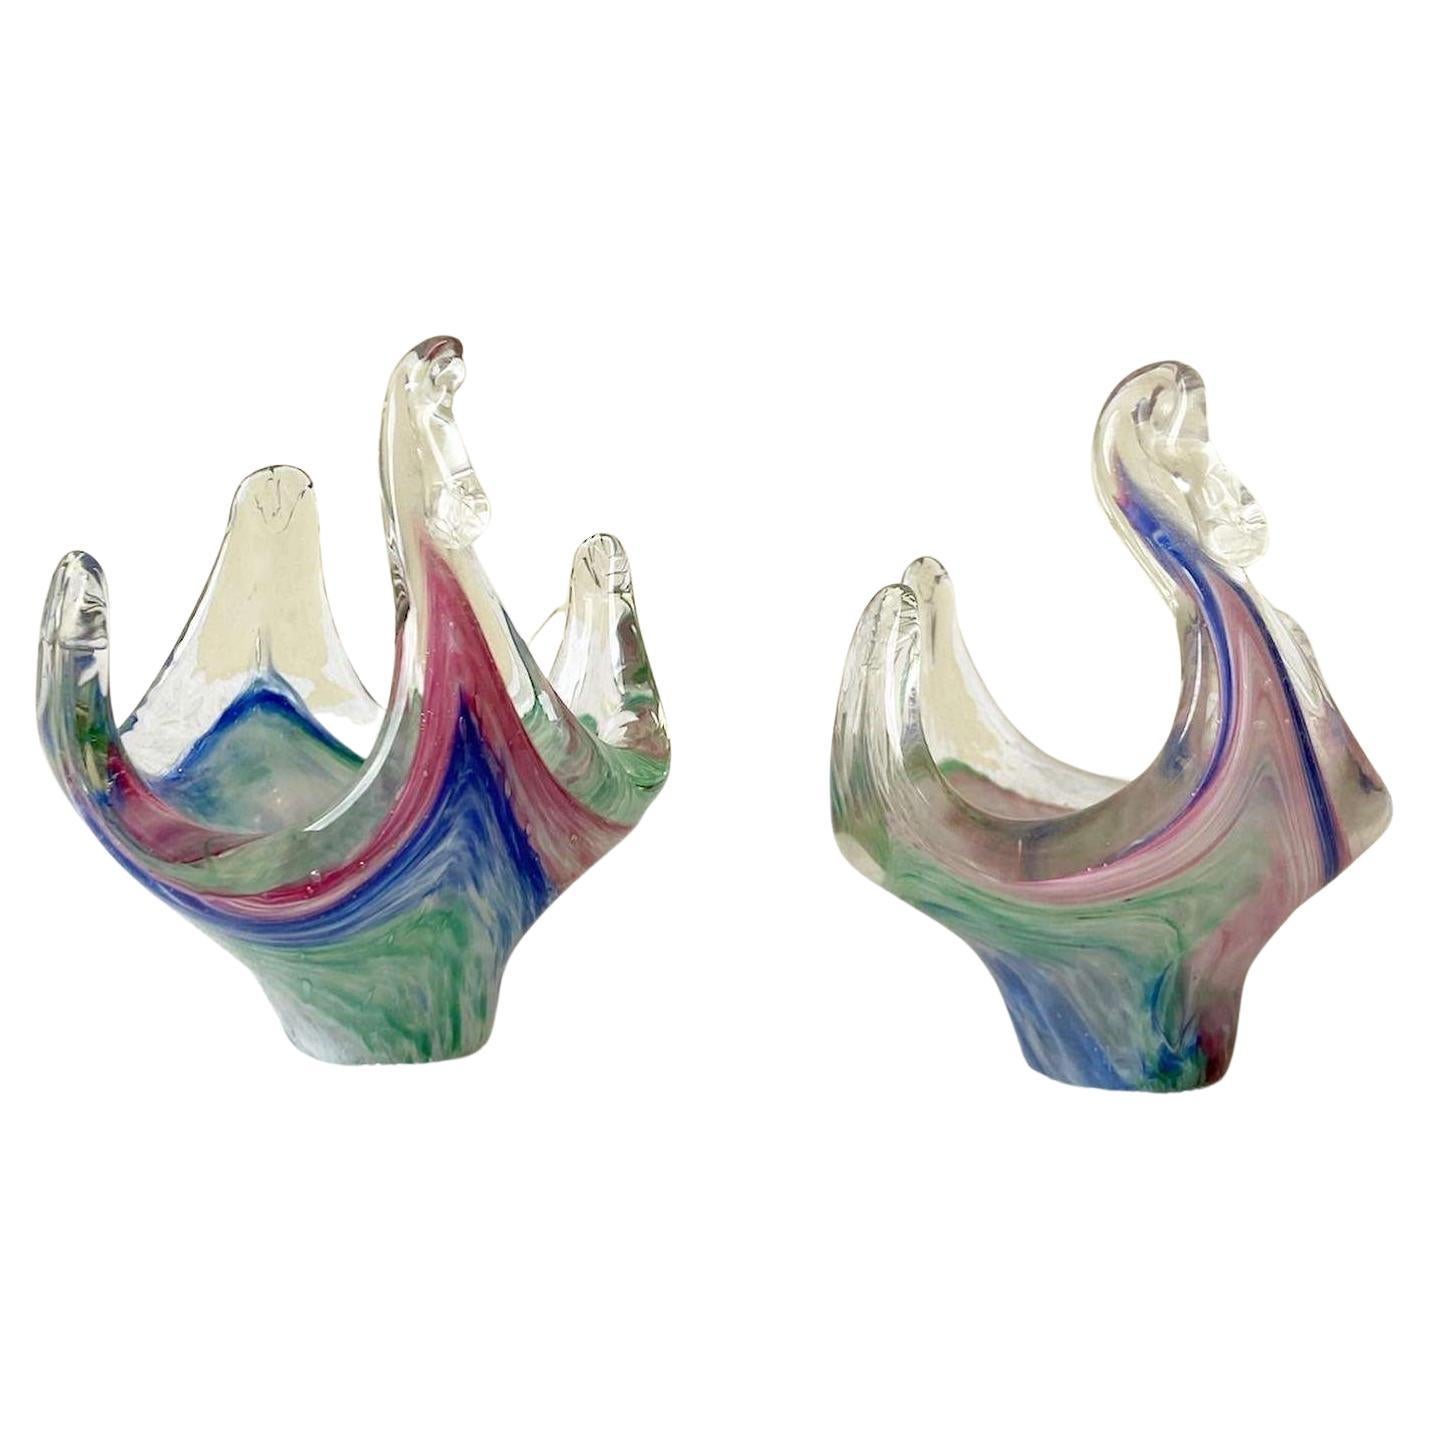 Postmodern Glass Swan Decorative Candy Dishes - a Pair